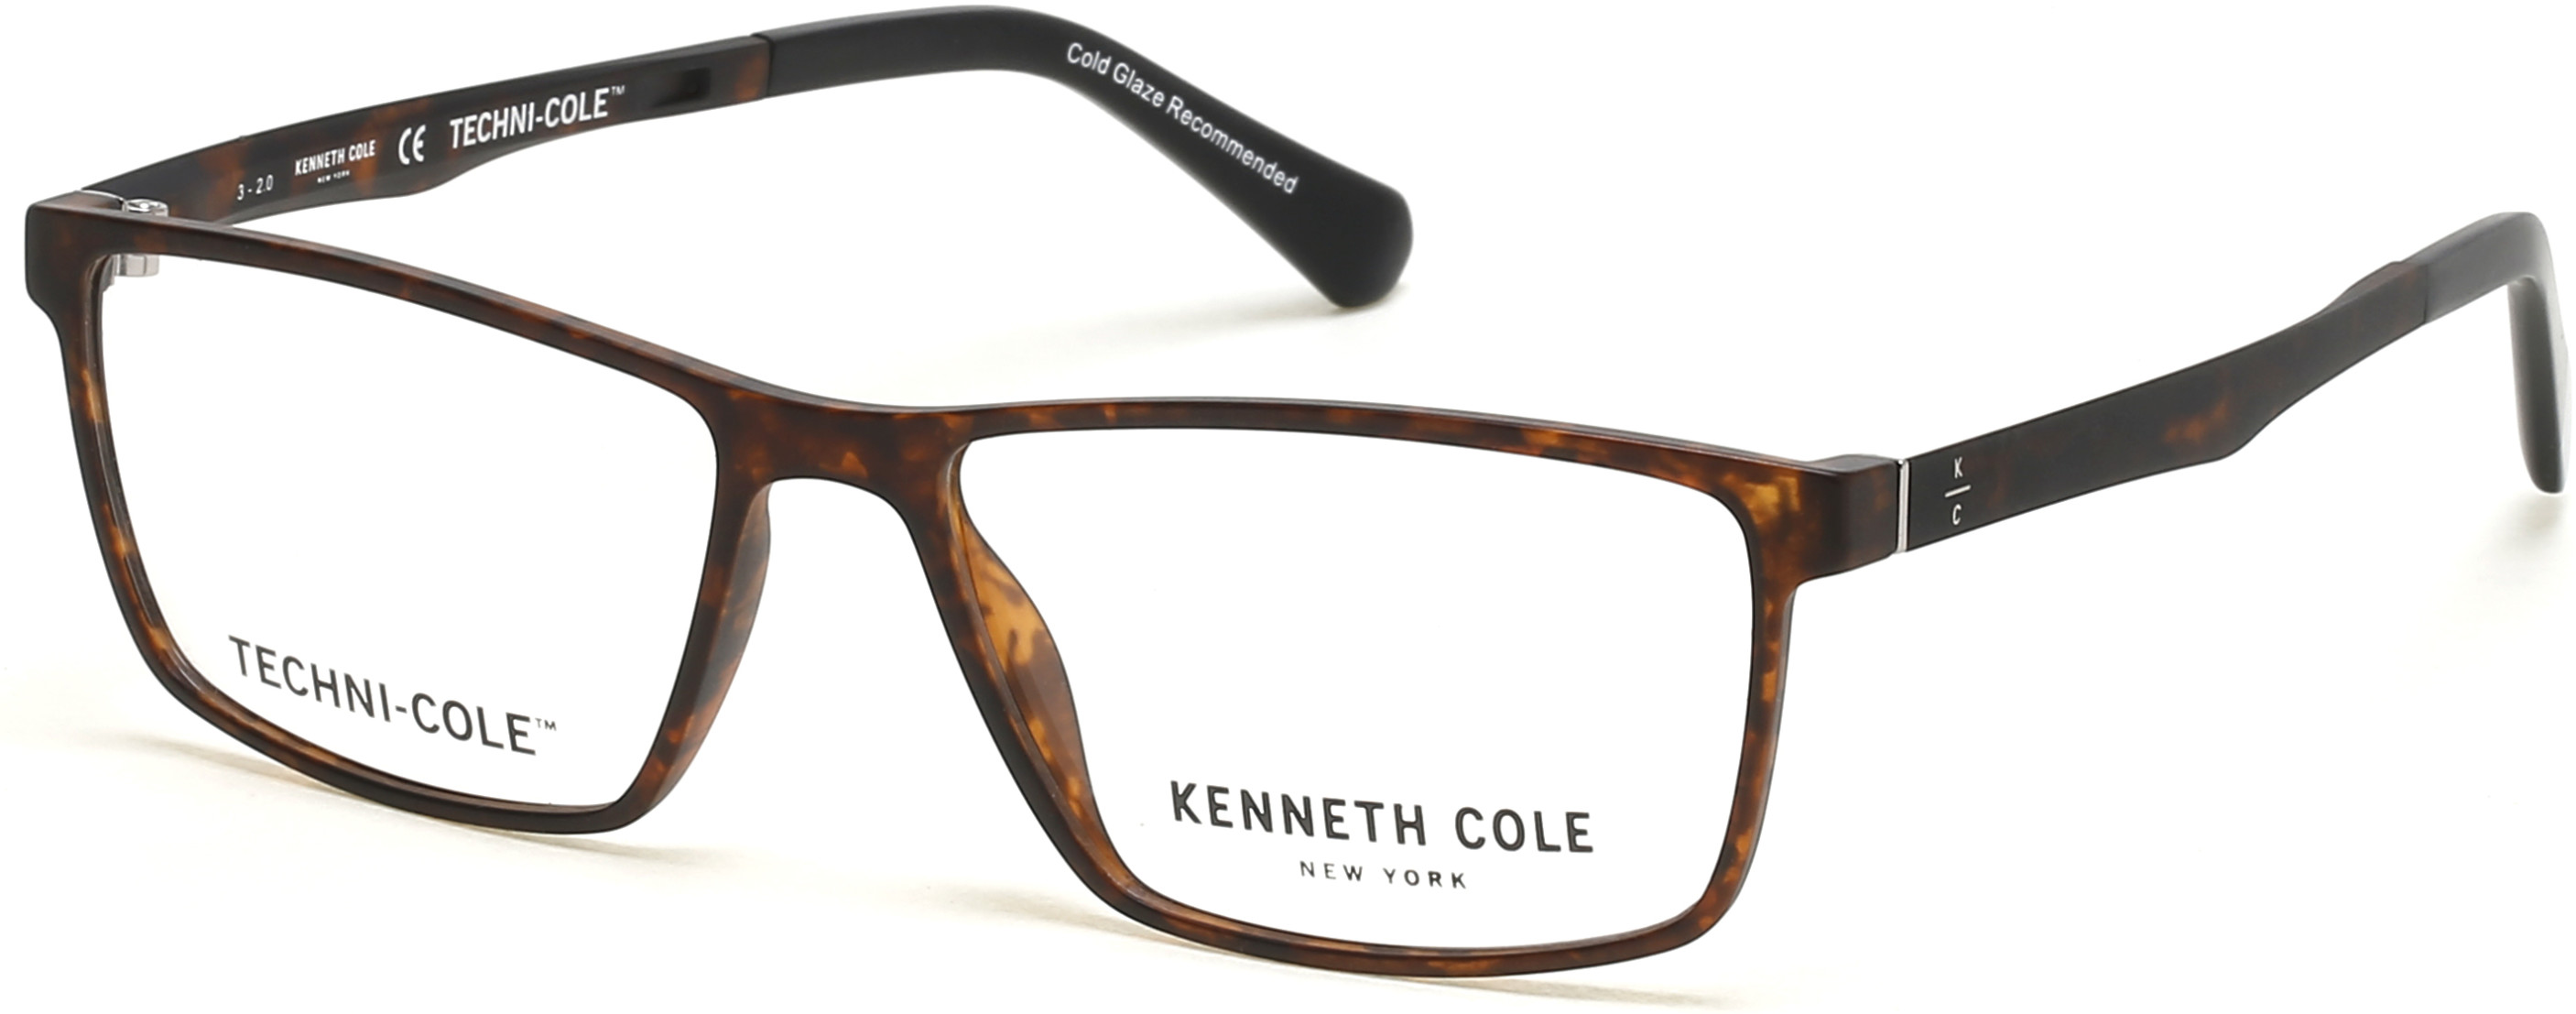 KENNETH COLE NY 0318 052